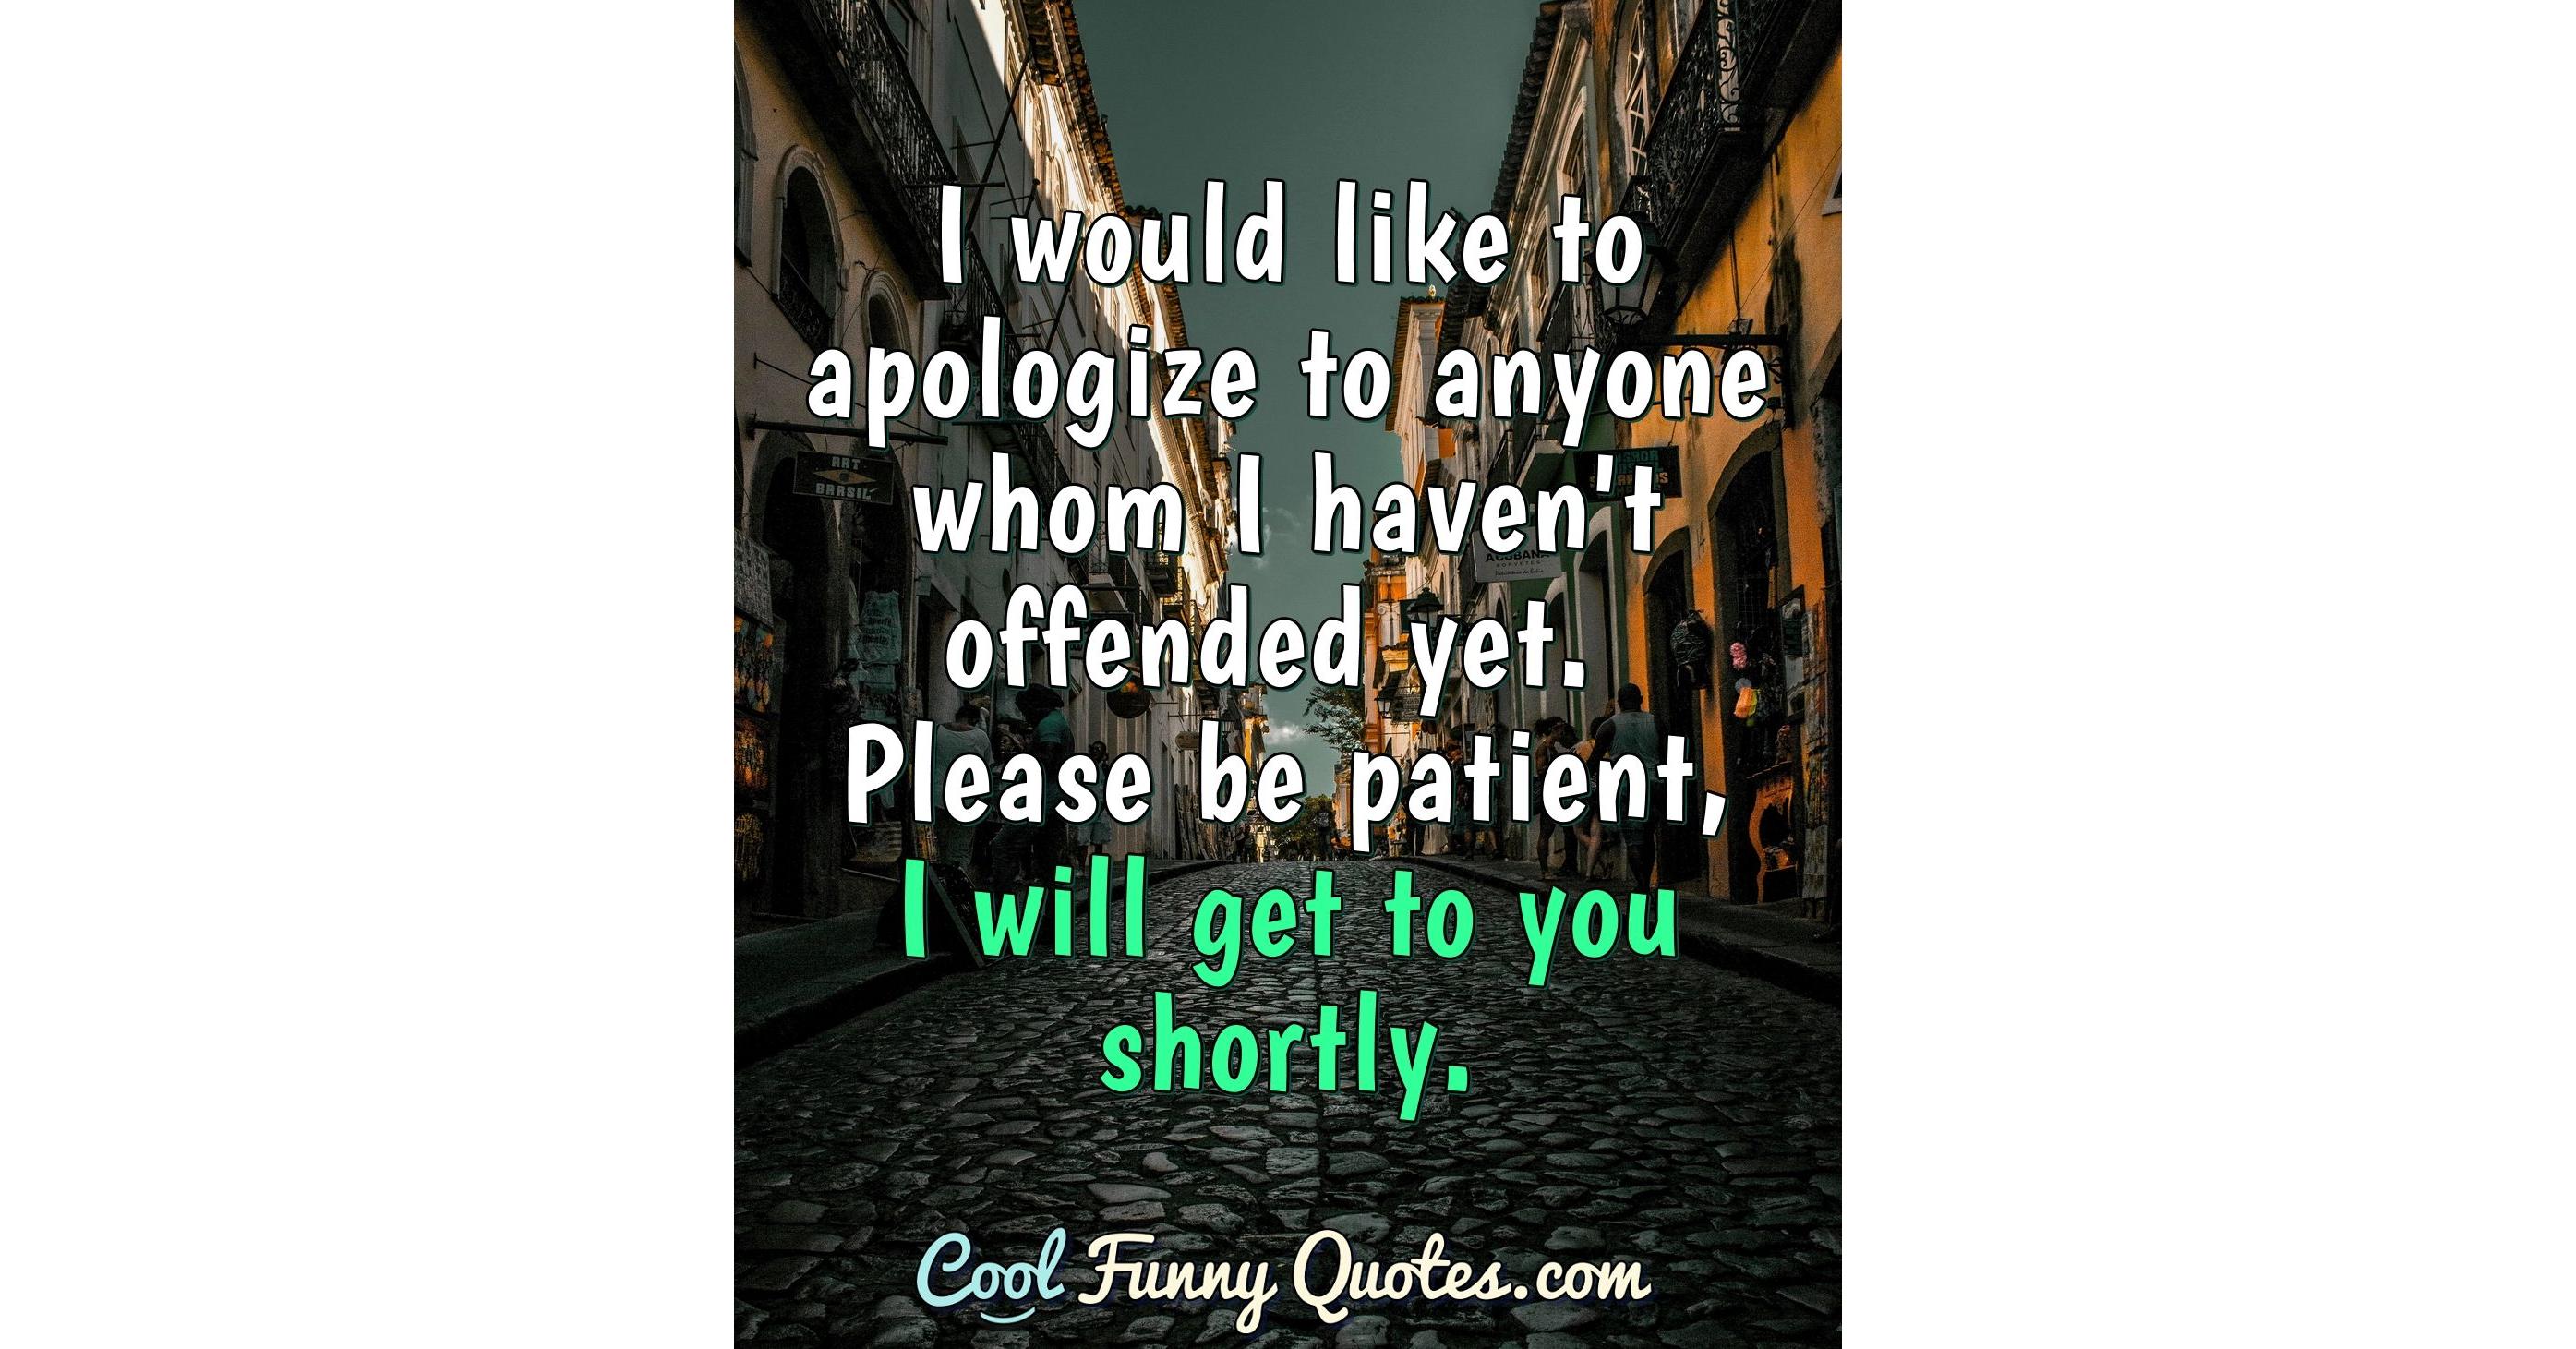 tf would like apologize anyone whom havent offended yet please patient anonymous stupid quote